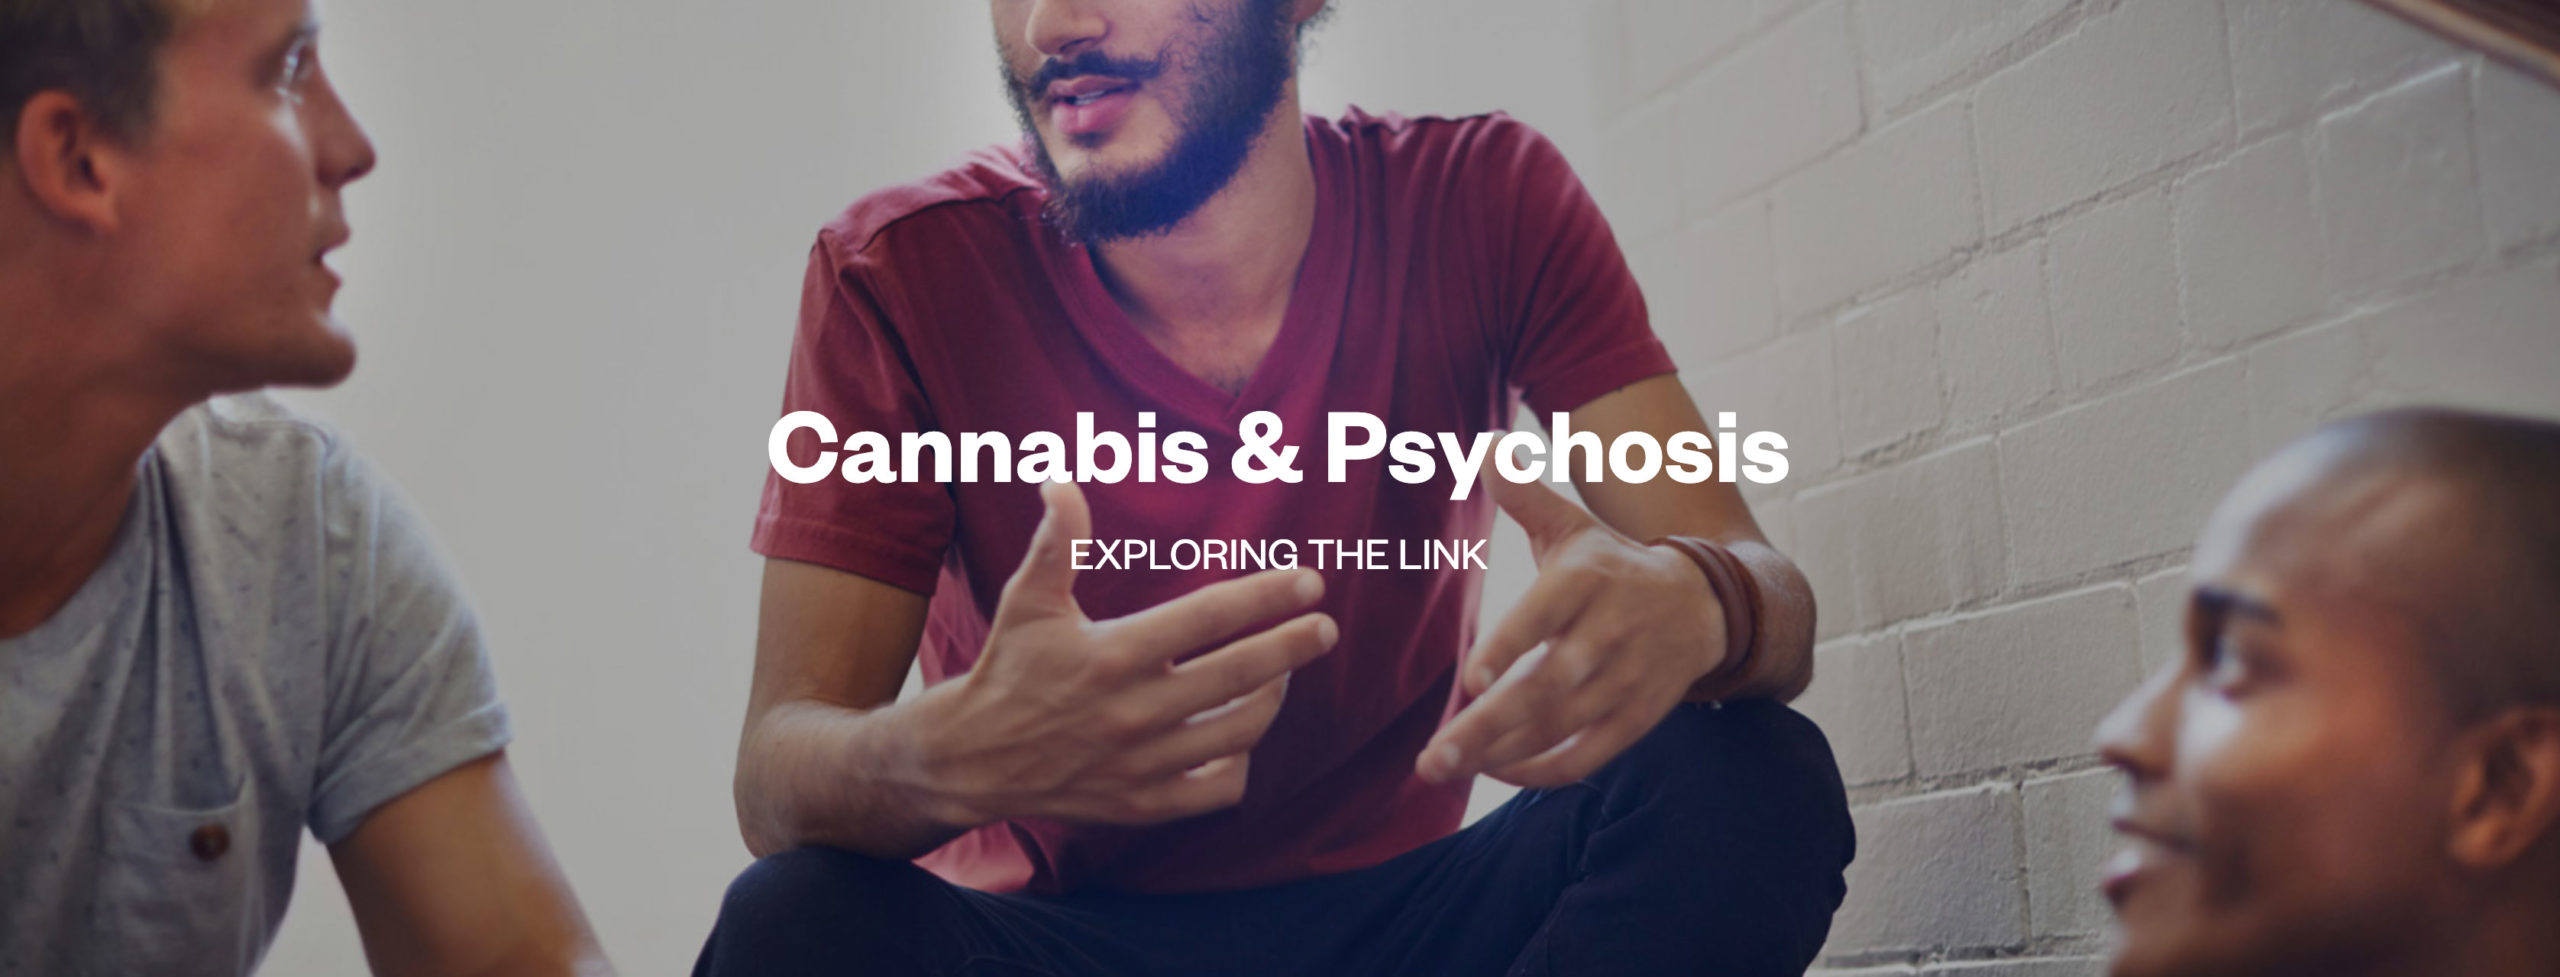 Cannabis And Psychosis: Exploring The Link (SSC)